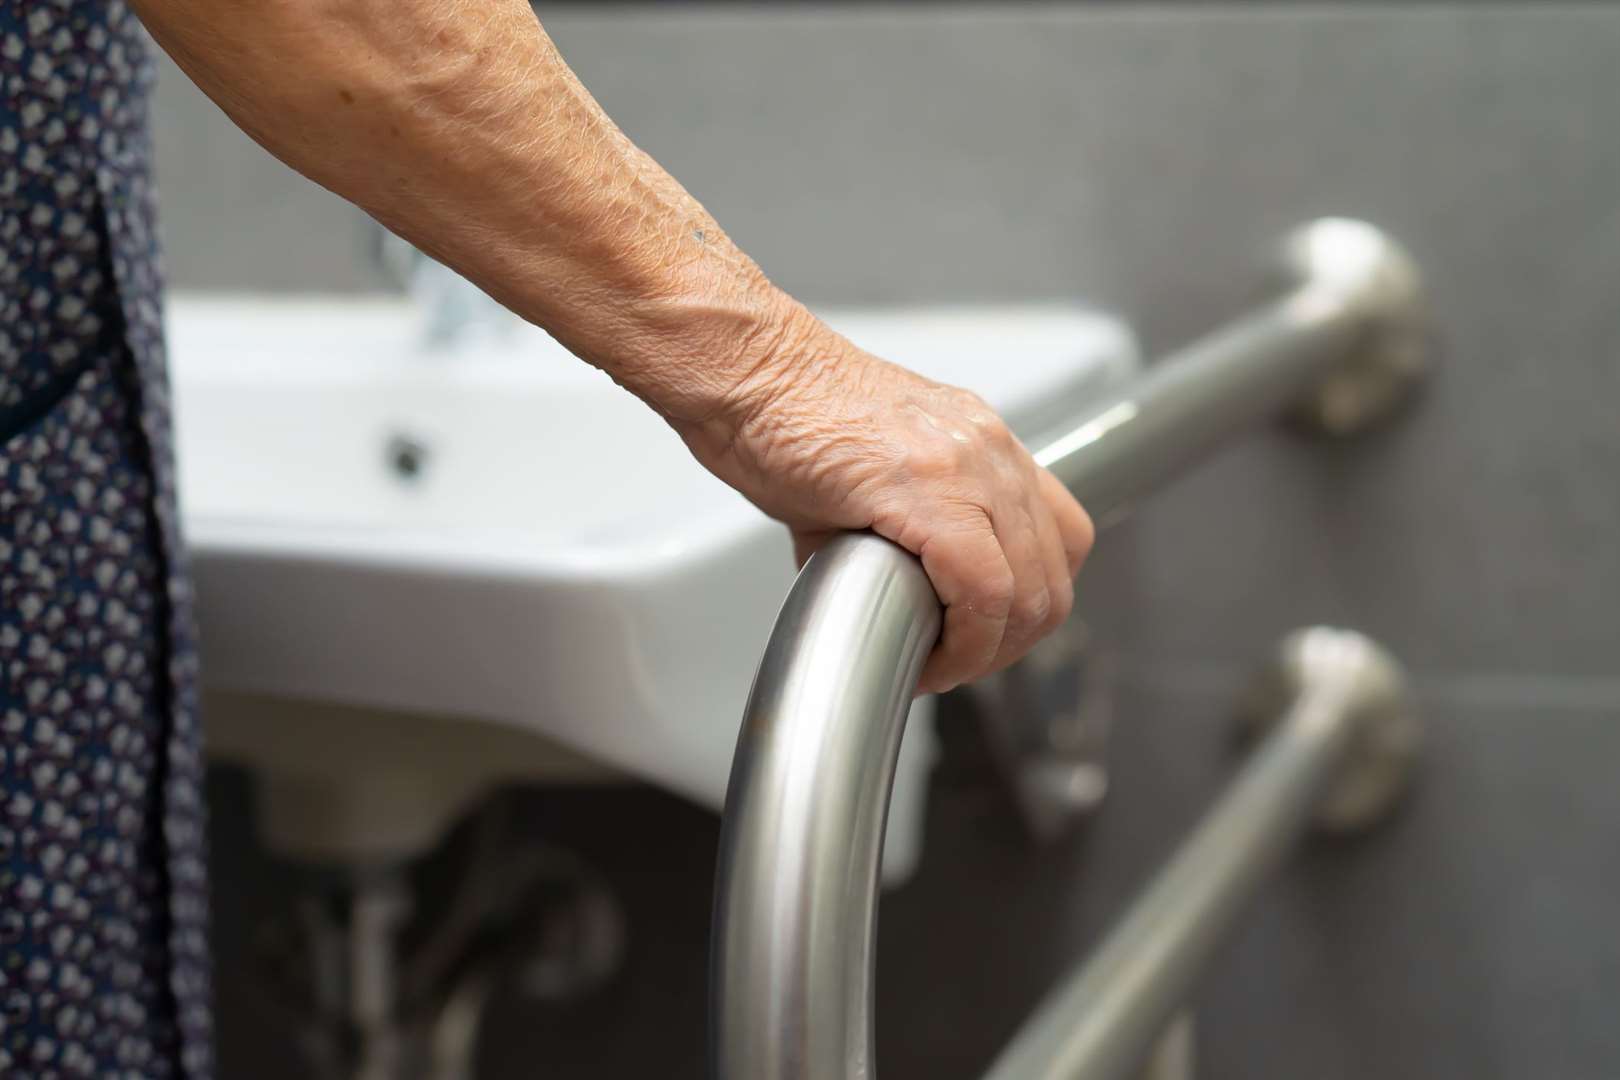 Many disabled people struggle to complete daily tasks, such as cooking or showering. Picture: istock/sasirin pamai